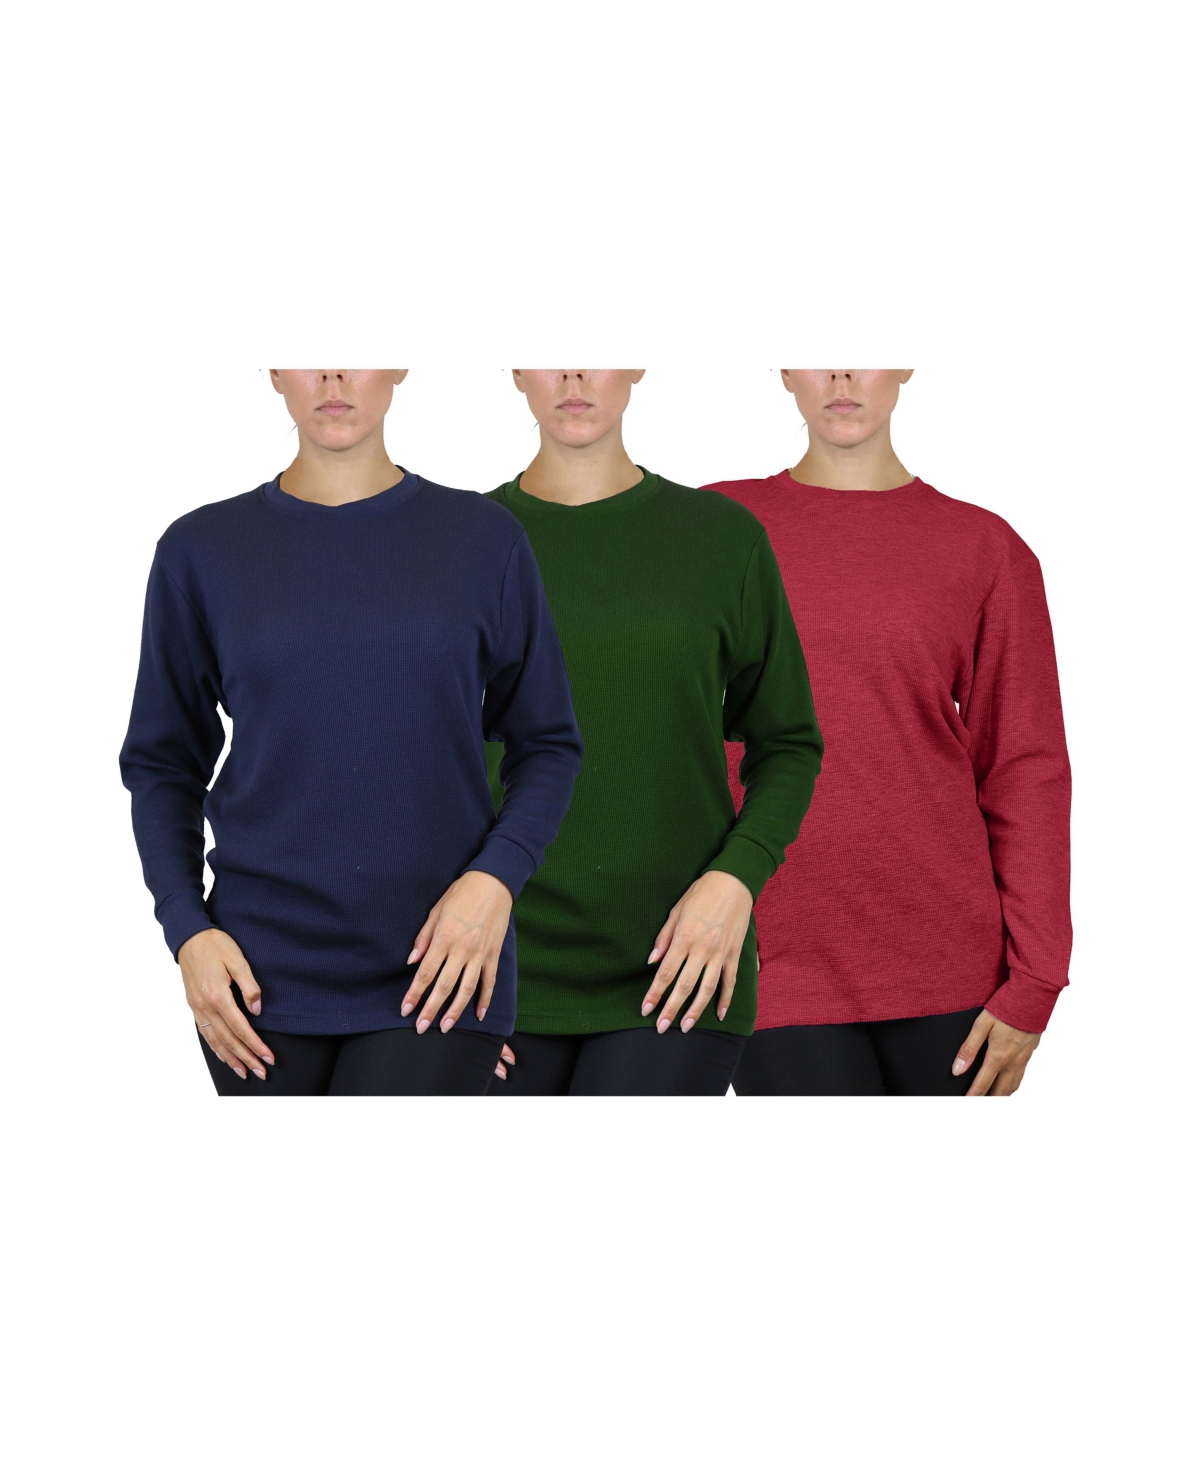 Shop Galaxy By Harvic Women's Loose Fit Waffle Knit Thermal Shirt, Pack Of 3 In Navy,olive,burgundy